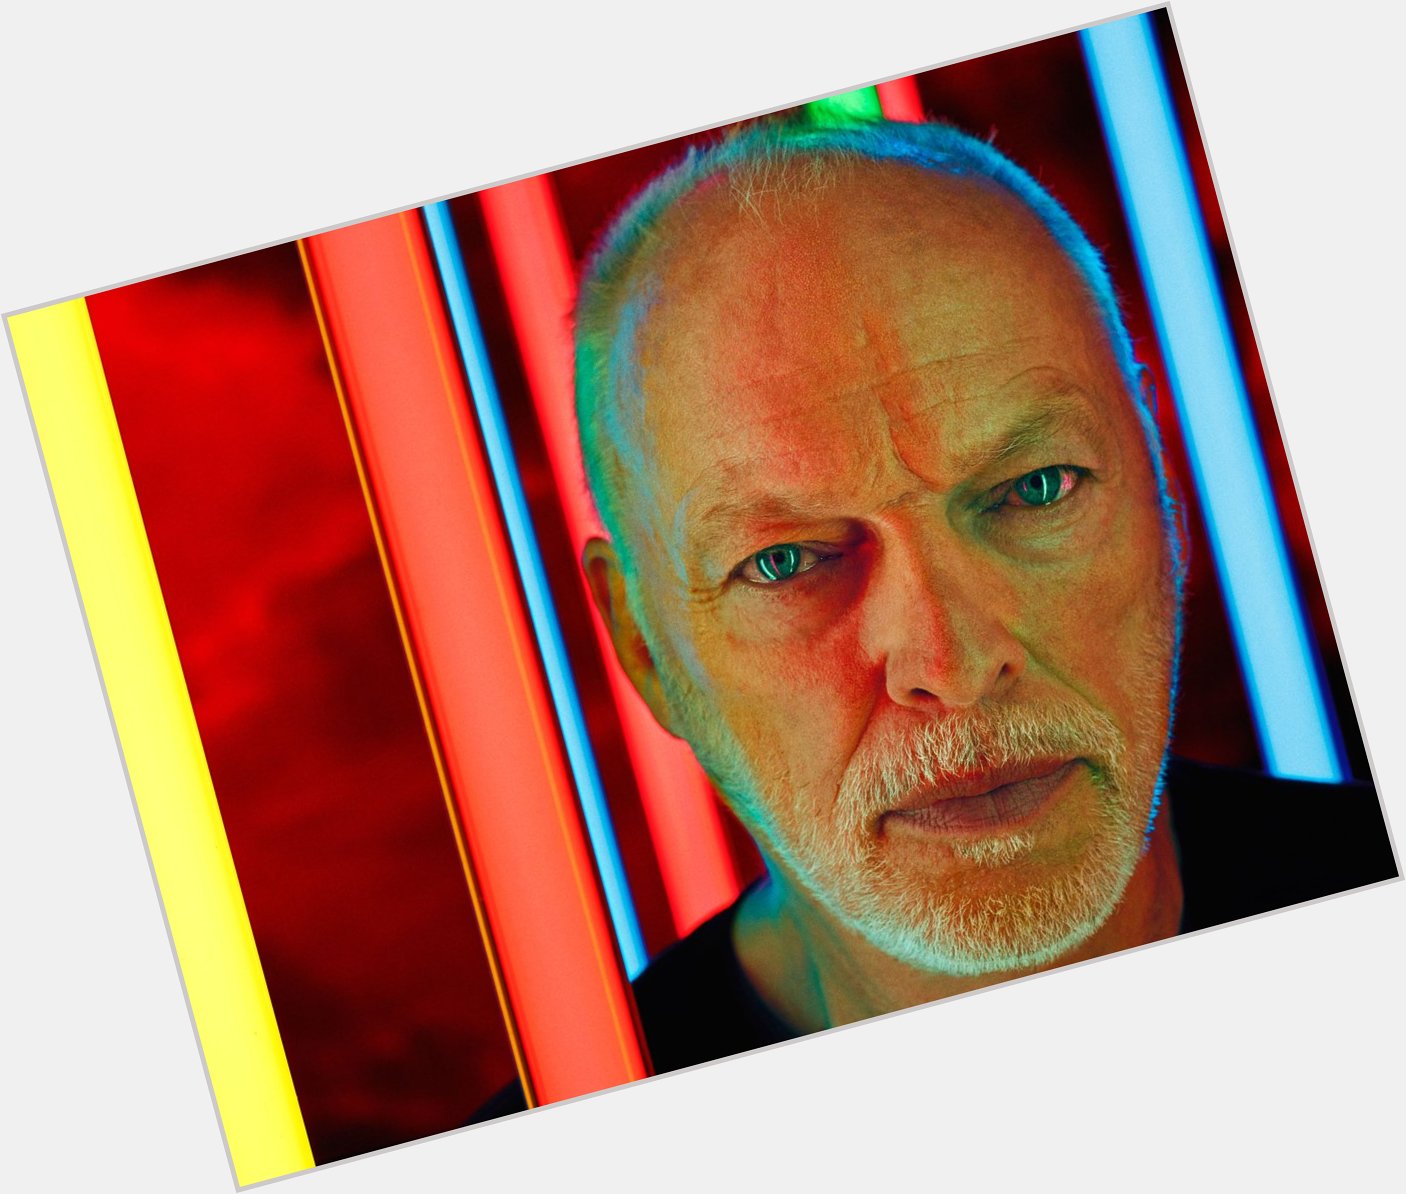 David Gilmour\s song with the best Guitar Solo is ...

Happy Birthday Mr. Gilmour 